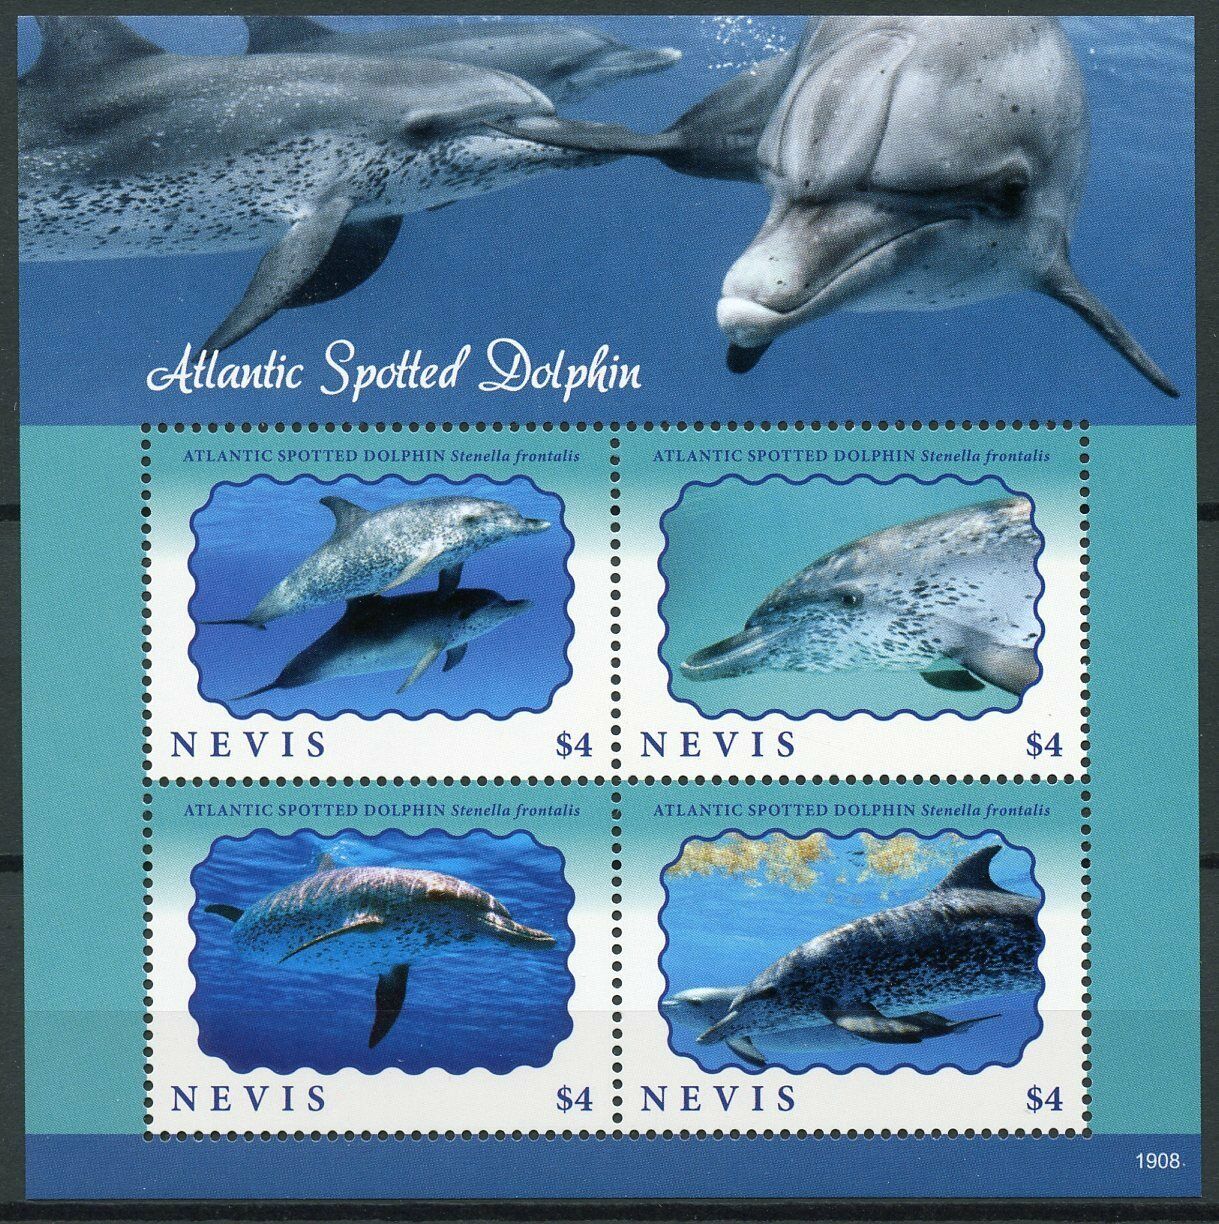 Nevis 2019 MNH Atlantic Spotted Dolphin 4v M/S Dolphins Marine Animals Stamps